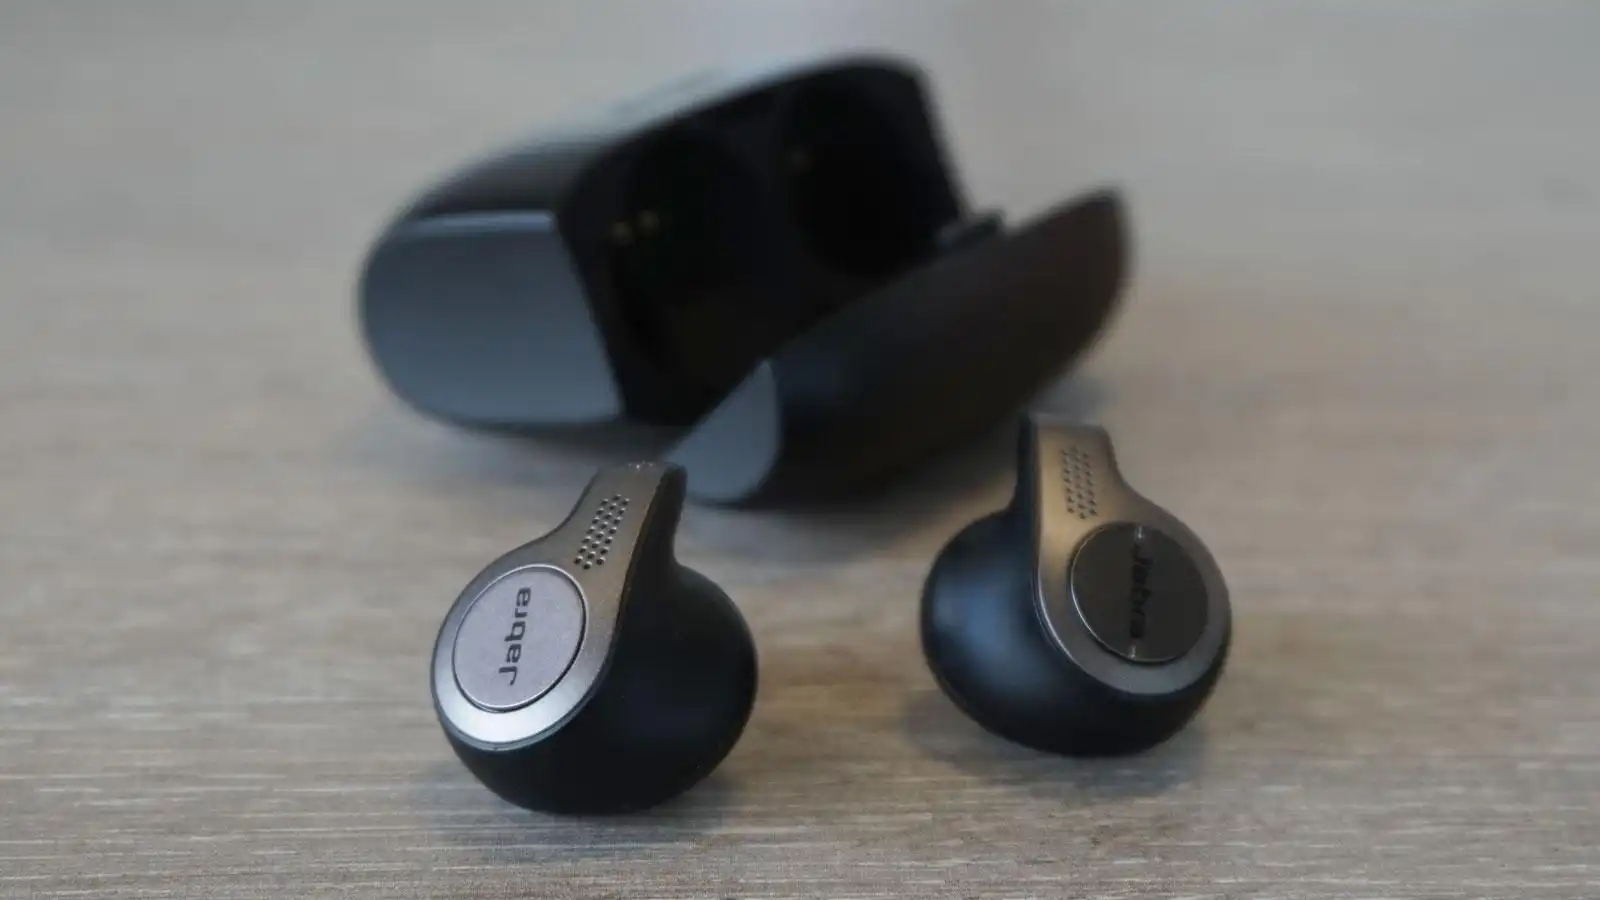 Black and silver Jabra Elite 65t pair and its black case on a table